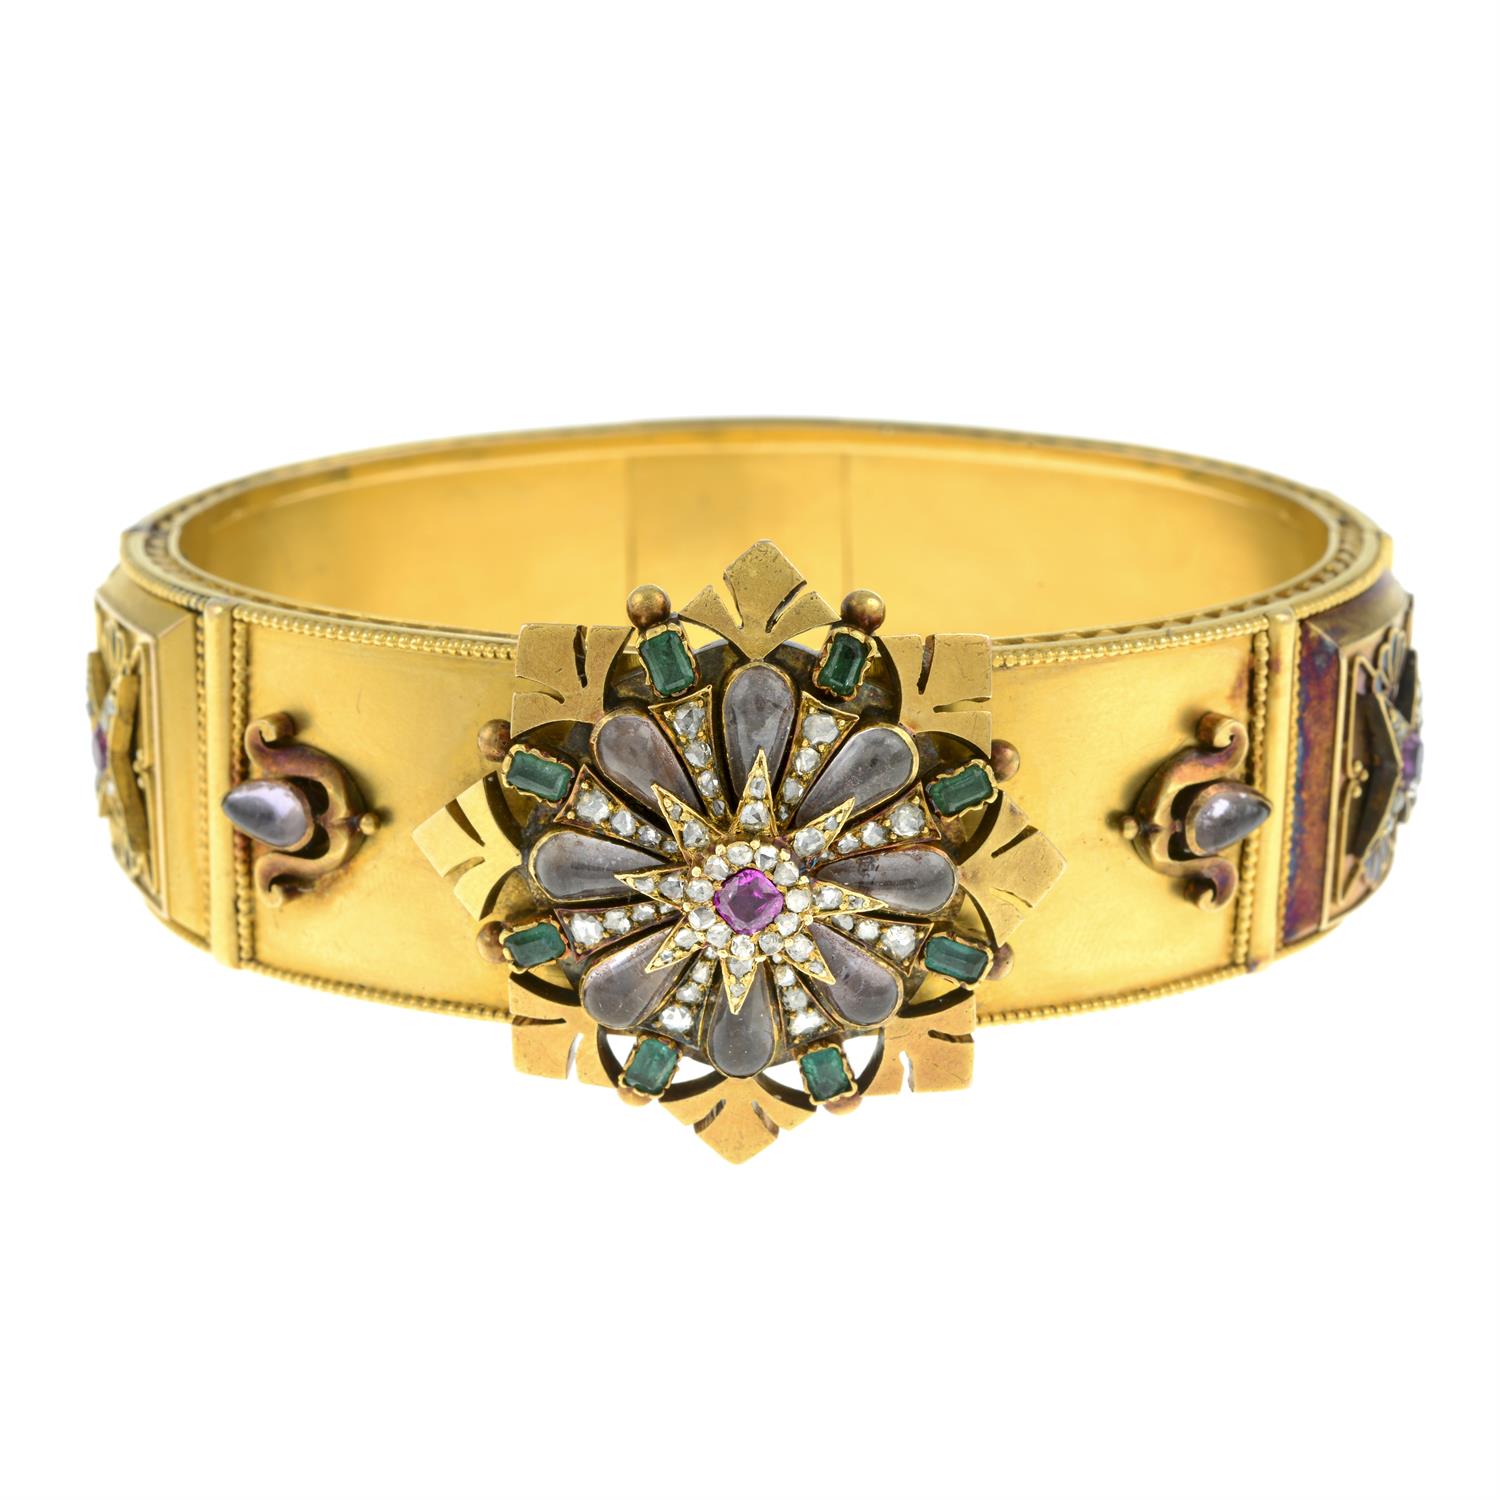 Gold gem and enamel bangle, by Carlo Giuliano - Image 2 of 5